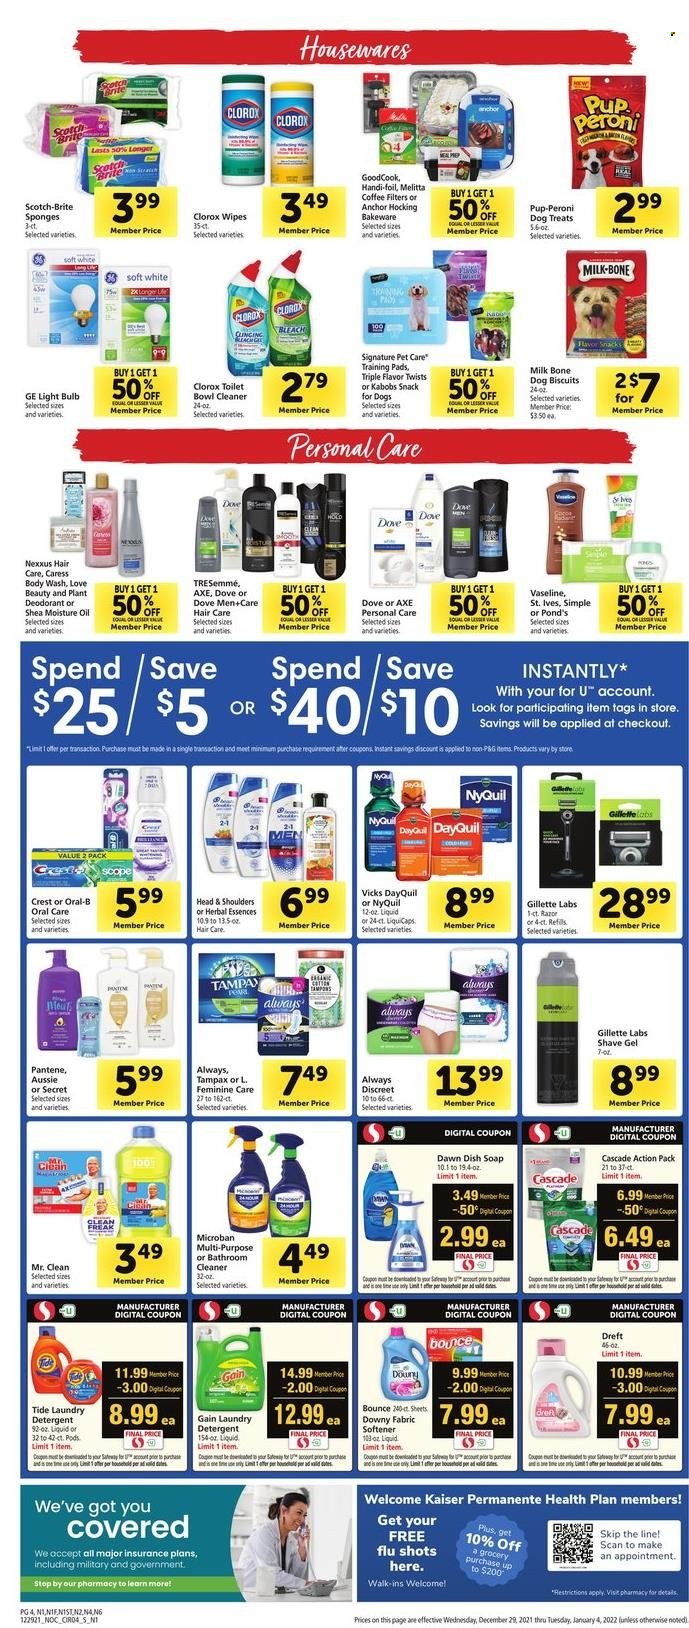 thumbnail - Safeway Flyer - 12/29/2021 - 01/04/2022 - Sales products - milk, Anchor, snack, rice, oil, coffee, wipes, detergent, Gain, cleaner, bleach, Clorox, Cascade, Tide, fabric softener, Bounce, Downy Laundry, body wash, Dove, Vaseline, POND'S, soap, Oral-B, Crest, Tampax, Always Discreet, tampons, Aussie, TRESemmé, Head & Shoulders, Pantene, Nexxus, Herbal Essences, Brite, Gillette, razor, shave gel, sponge, bakeware, bulb, light bulb, animal treats, dog food, dog biscuits, Pup-Peroni, DayQuil, NyQuil, Vicks. Page 4.